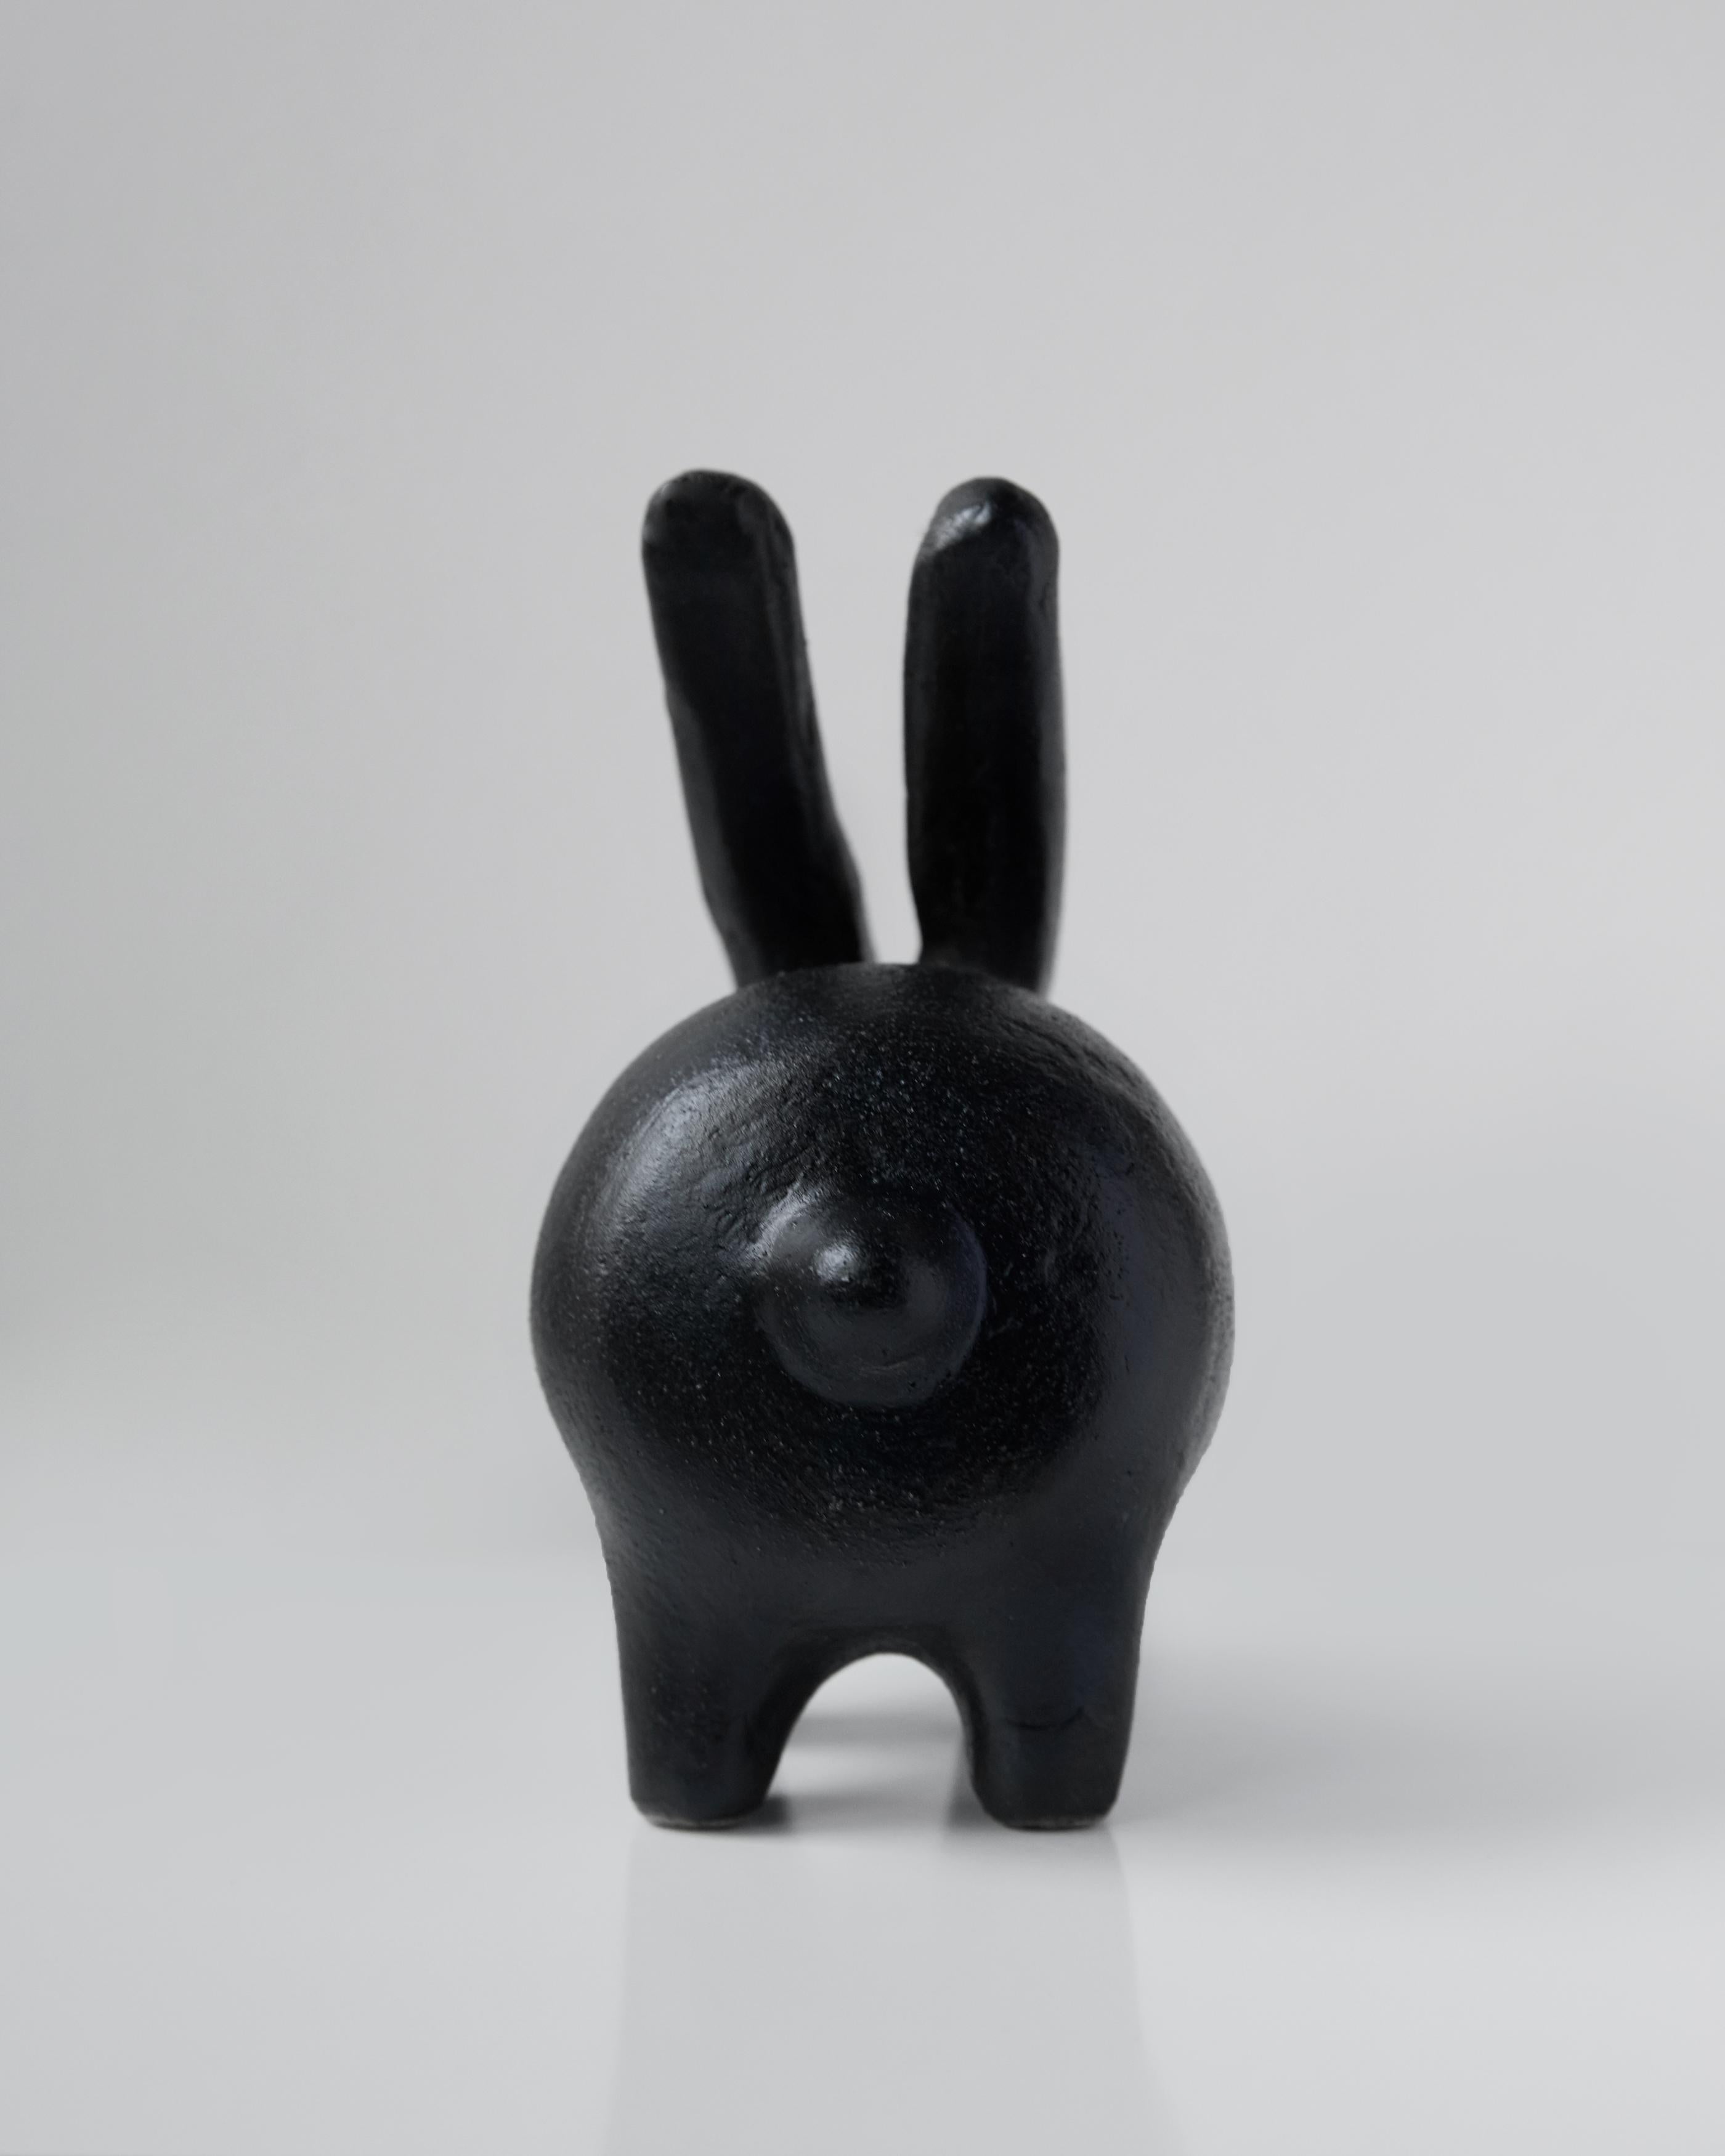 Serhii Mahno has explored the art of zoomorphic sculptures. He created his own collection of zoomorphic ceramics in the ceramic workshop of Serhii Makhno Products according to the sketches of Serhii Makhno and are made in limited editions: from 1 to